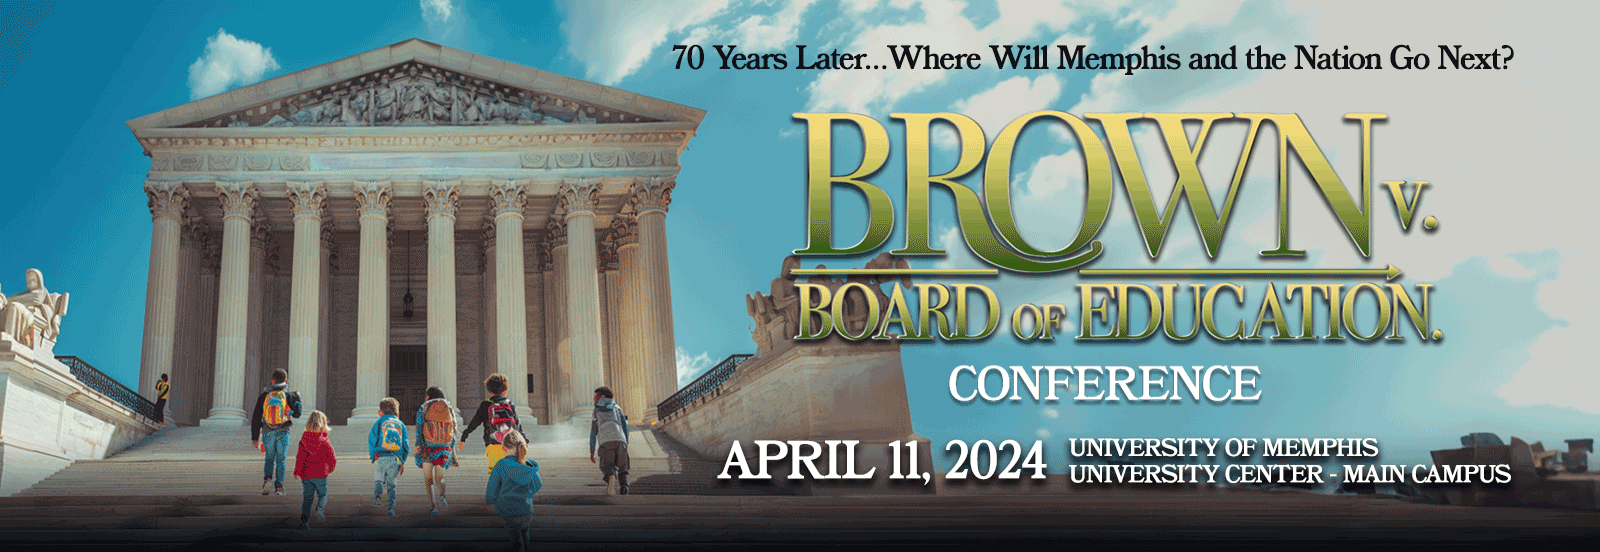 Brown v Board of Education 70th Anniversary Conference